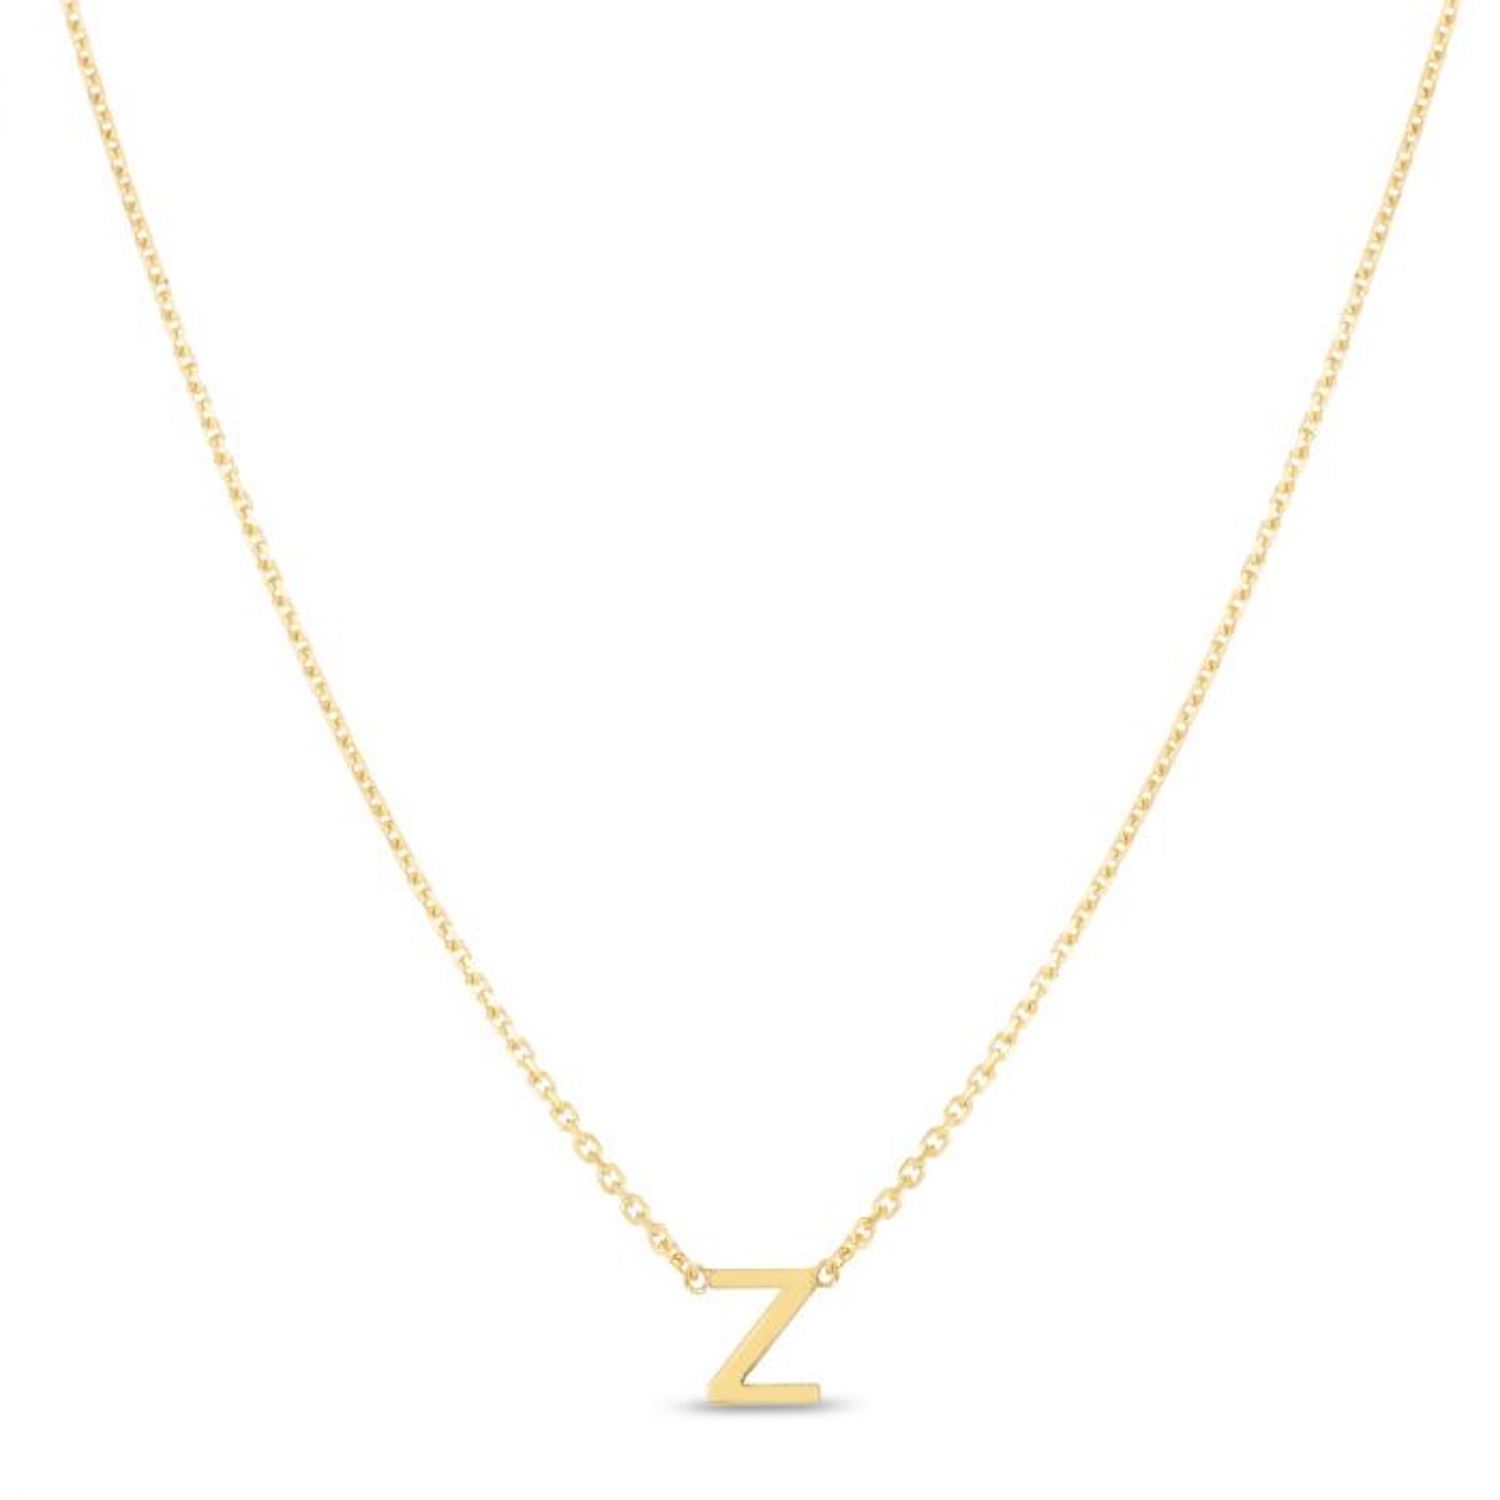 14K Yellow Gold Letter Initials Pendant Necklace 16"-18" - Z